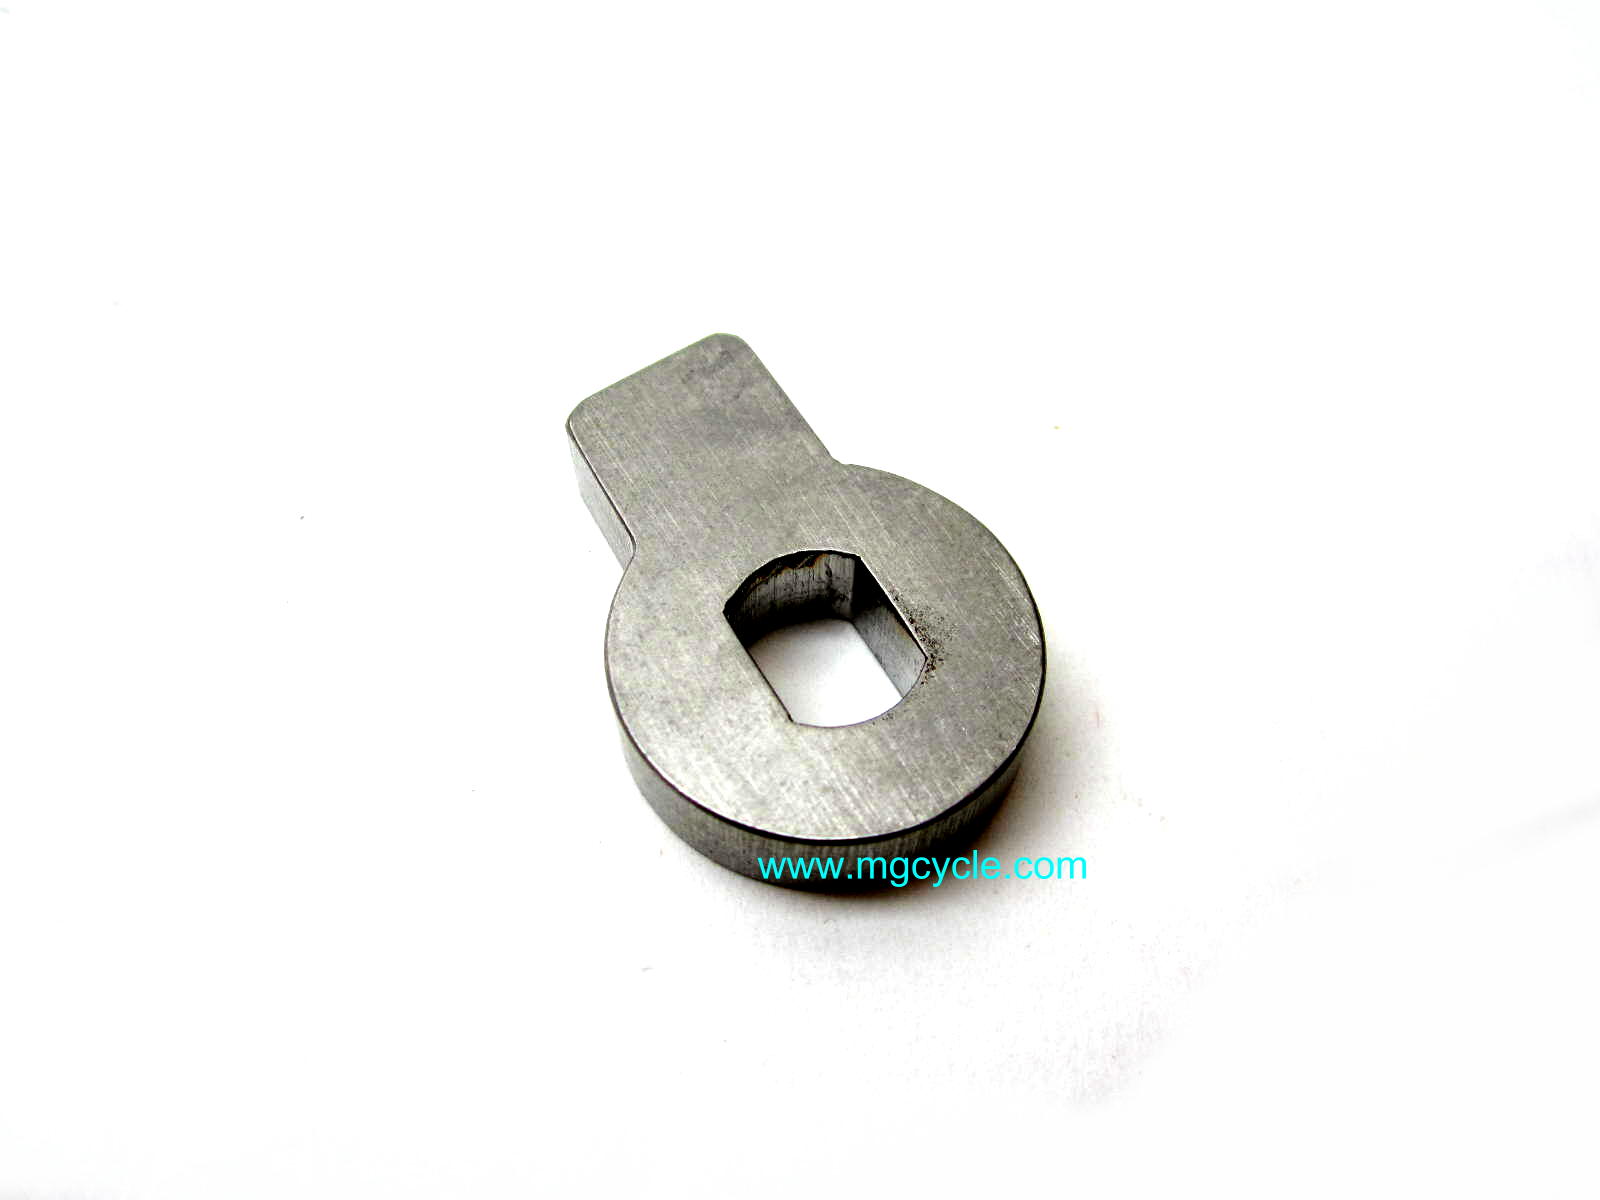 New improved stainless locking lug for side stands GU03432740